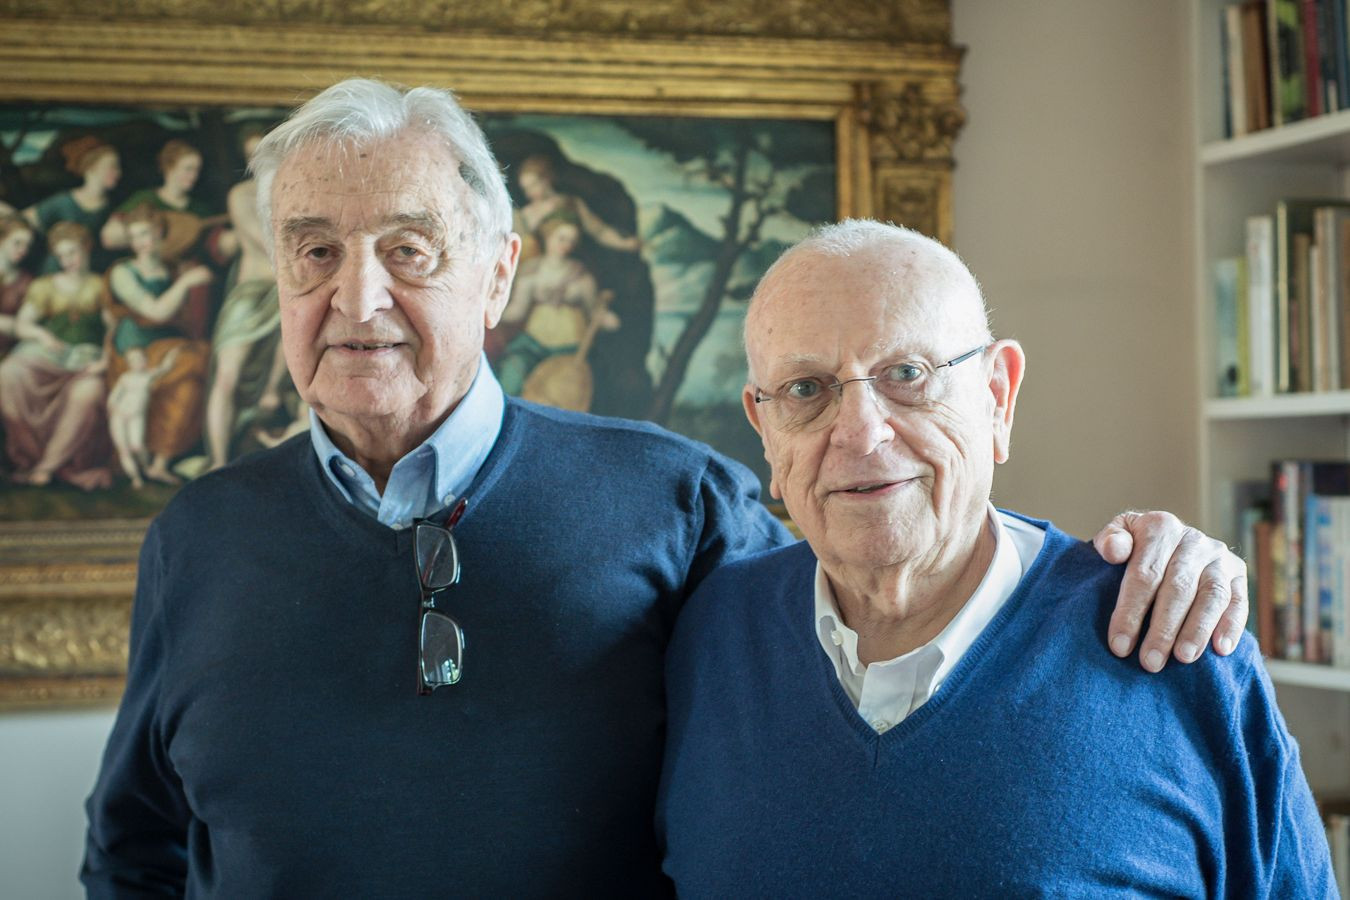 Francesco Gnecchi-Ruscone, left, also served as President of the Italian Archery Federation from 1969 to 1981©World Archery